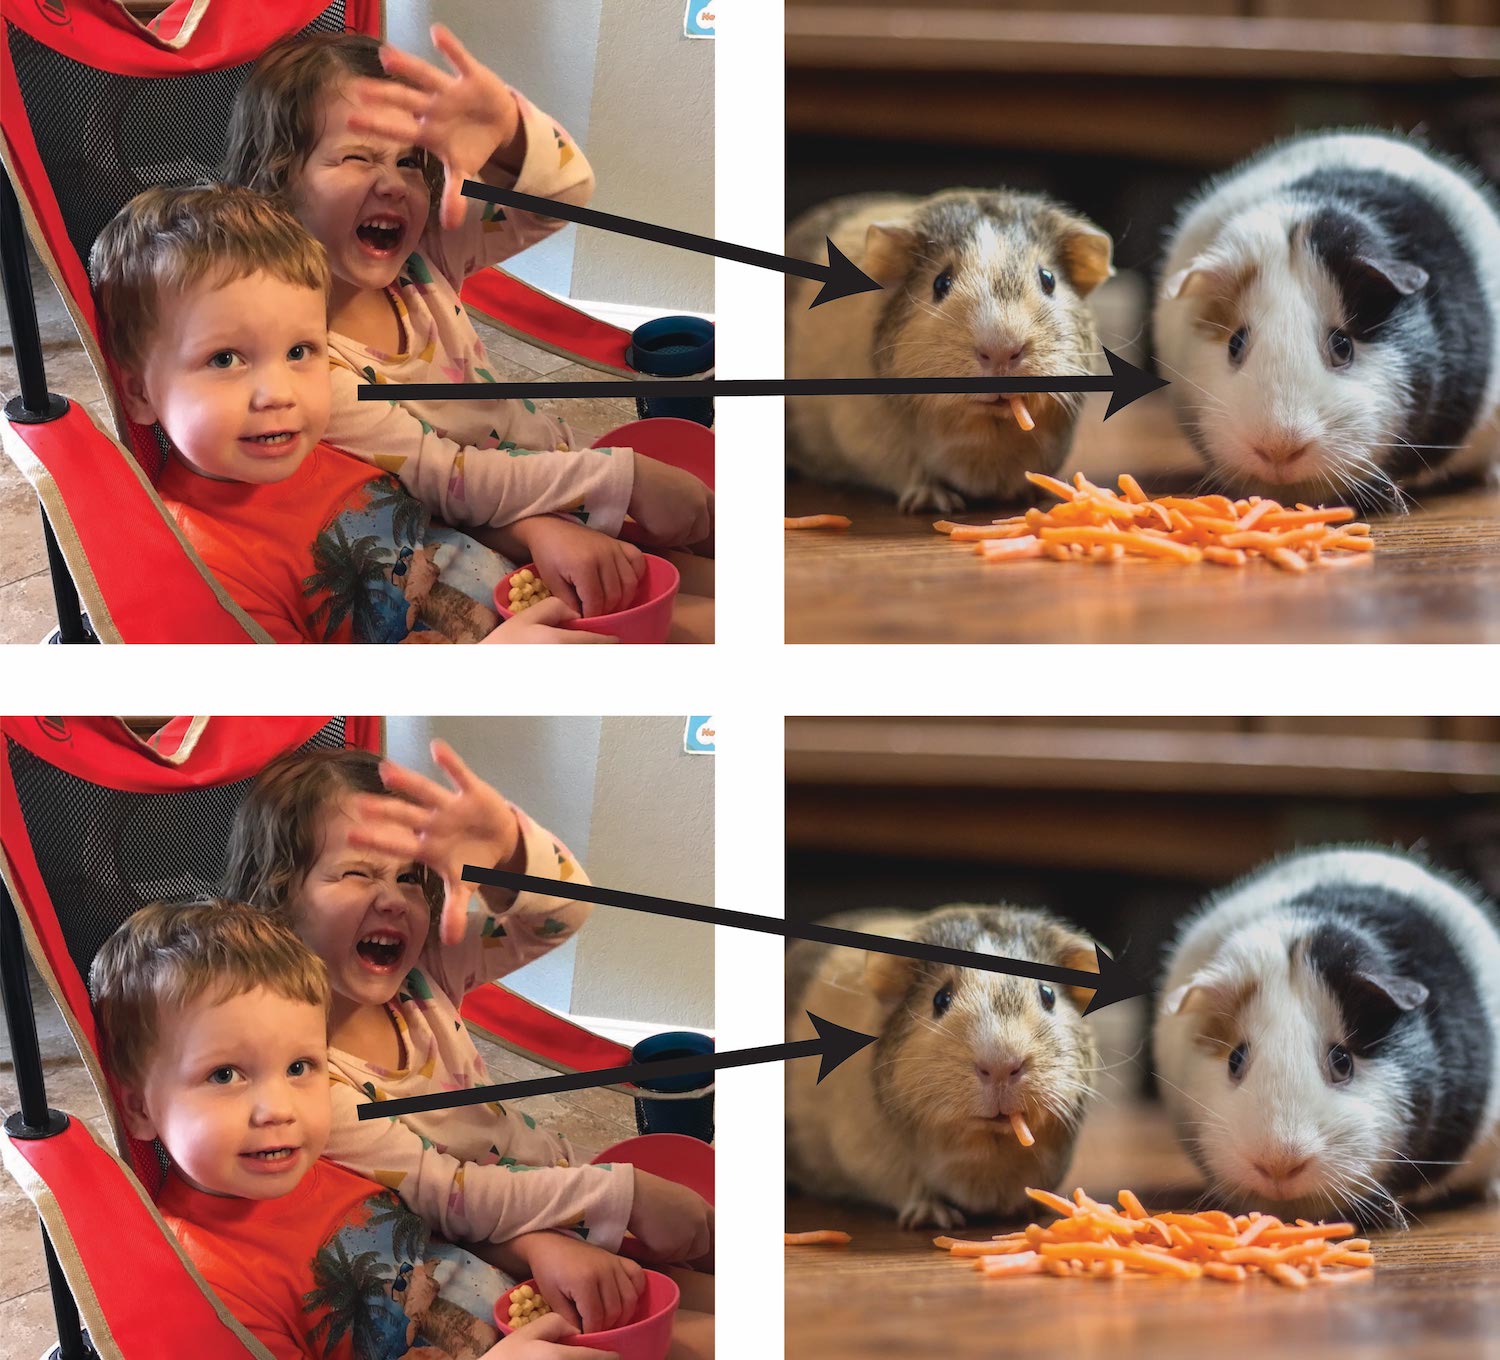 Top pair of images, left child paired with right guinea pig and right child paired with left guinea pig. Bottom pair of images, left child paired with left guinea pig and right child paired with right guinea pig.